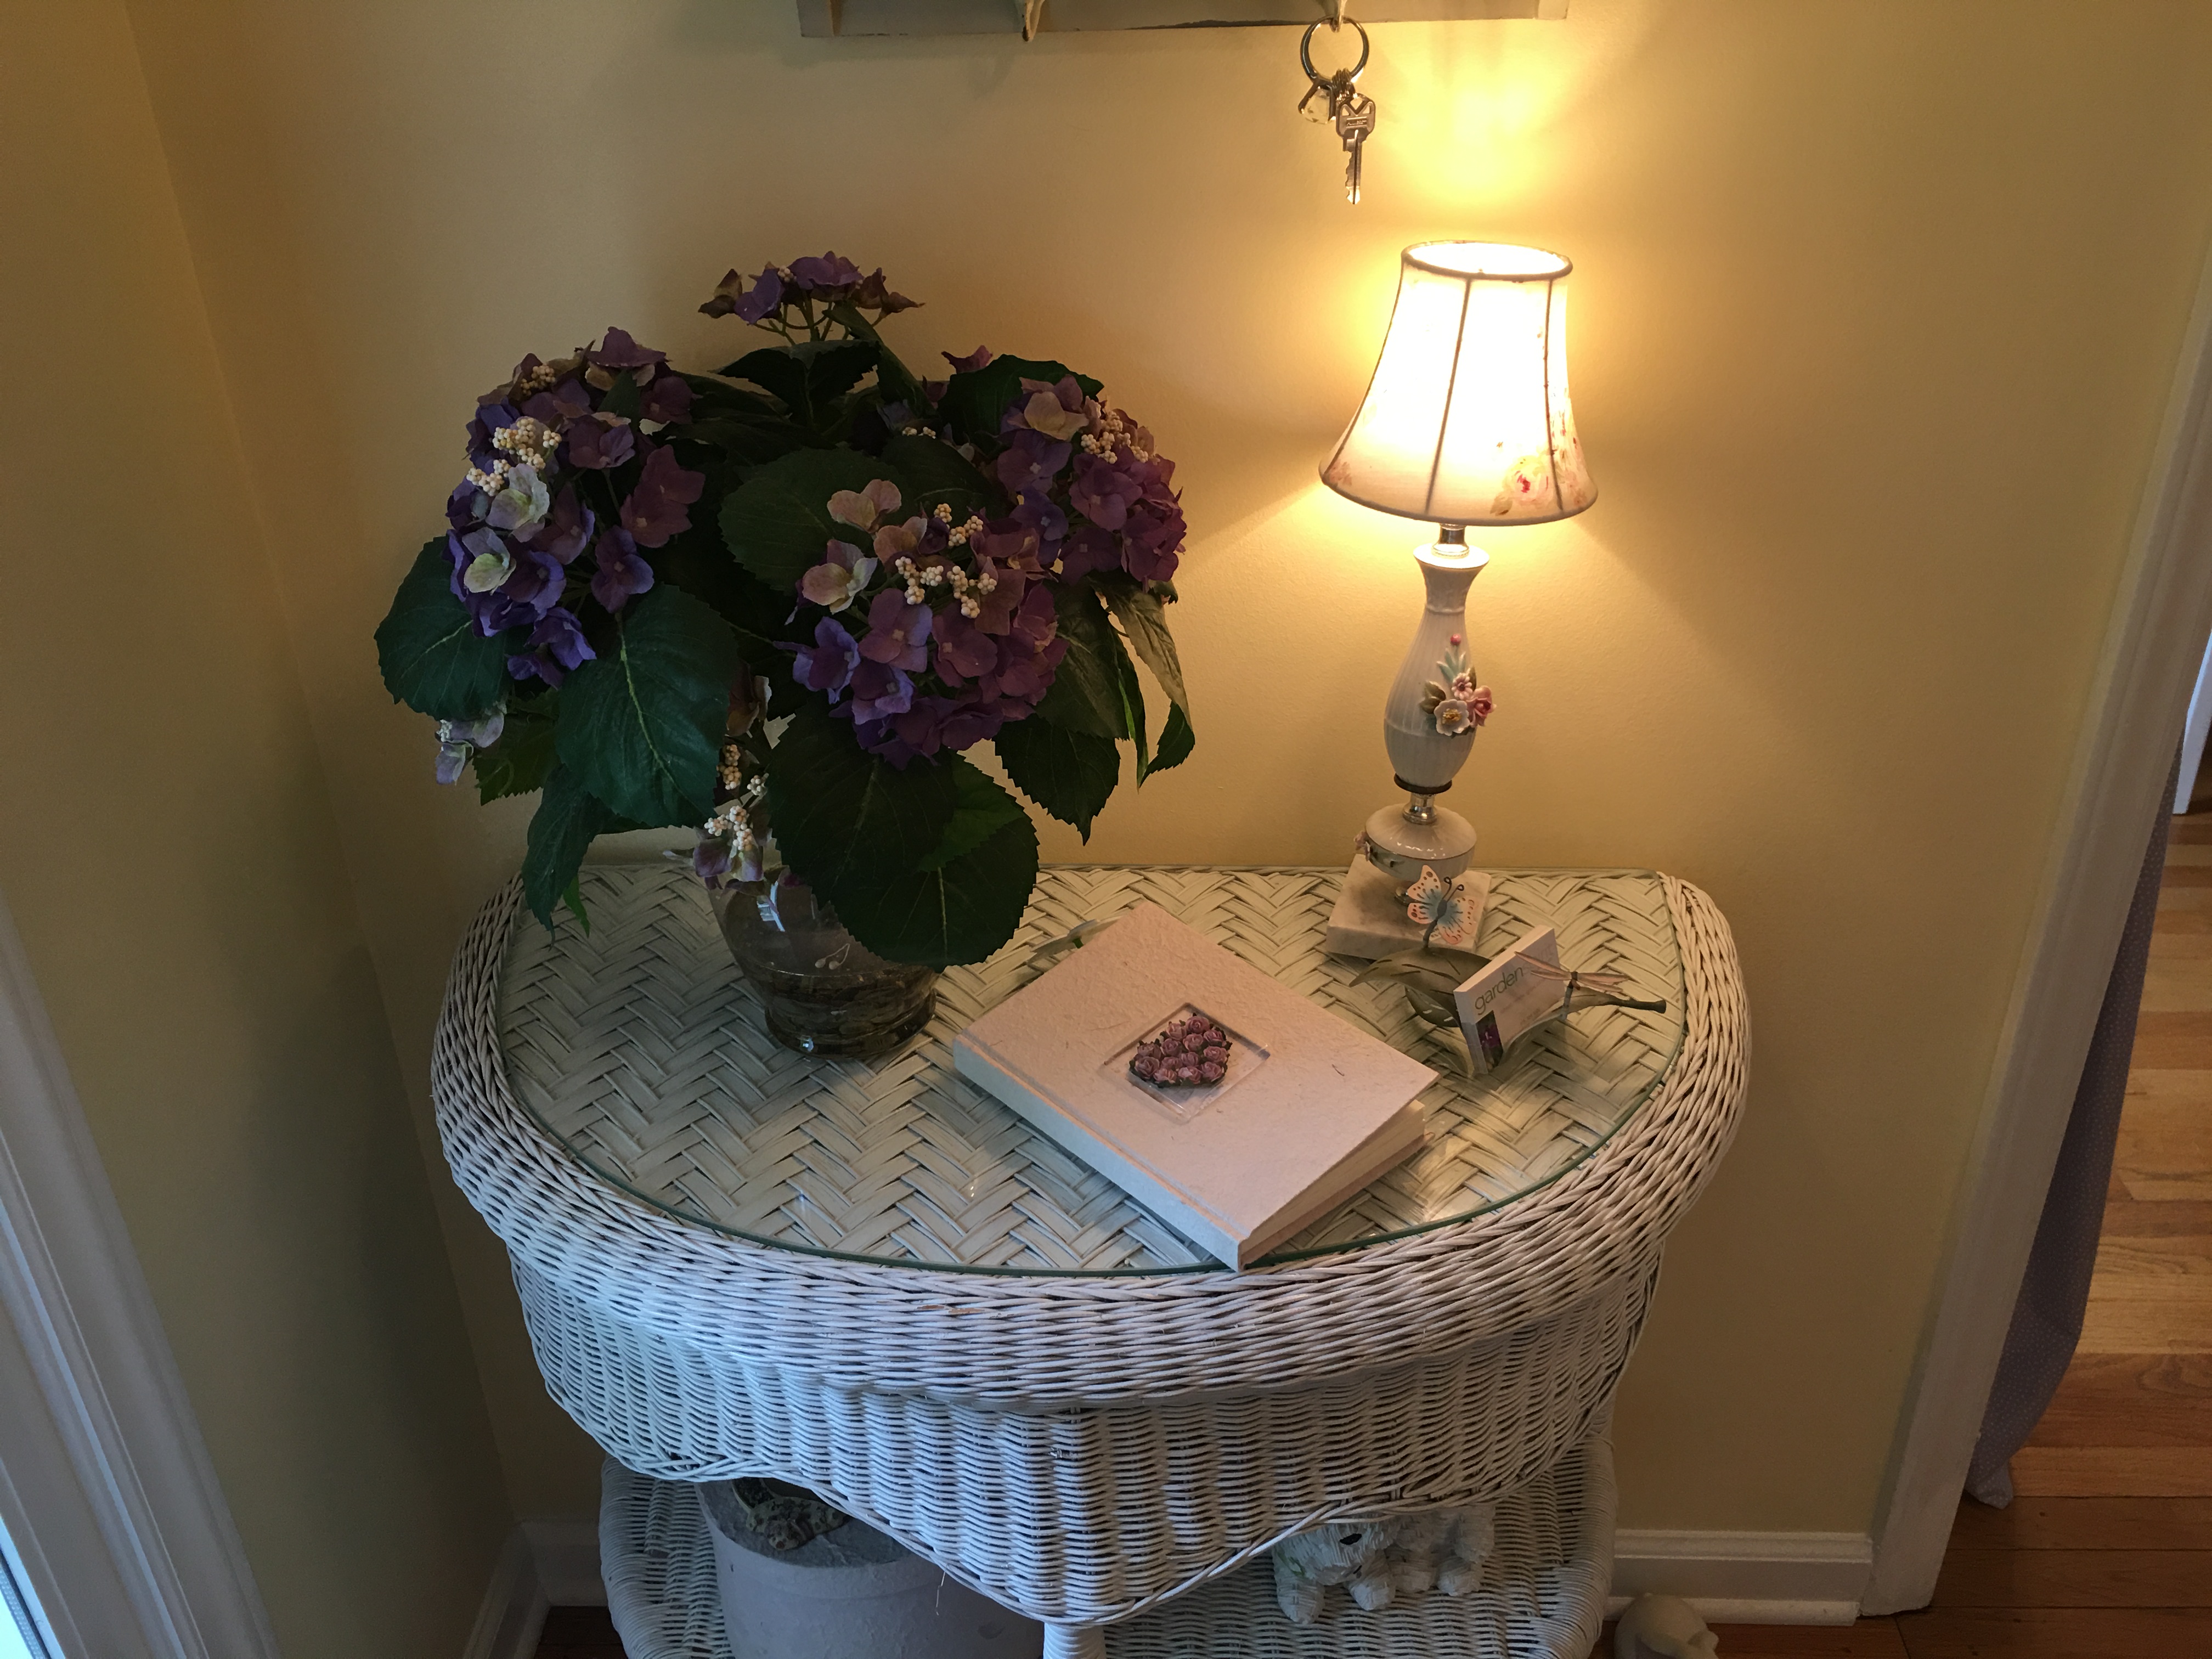 The dainty entry table with guest book.